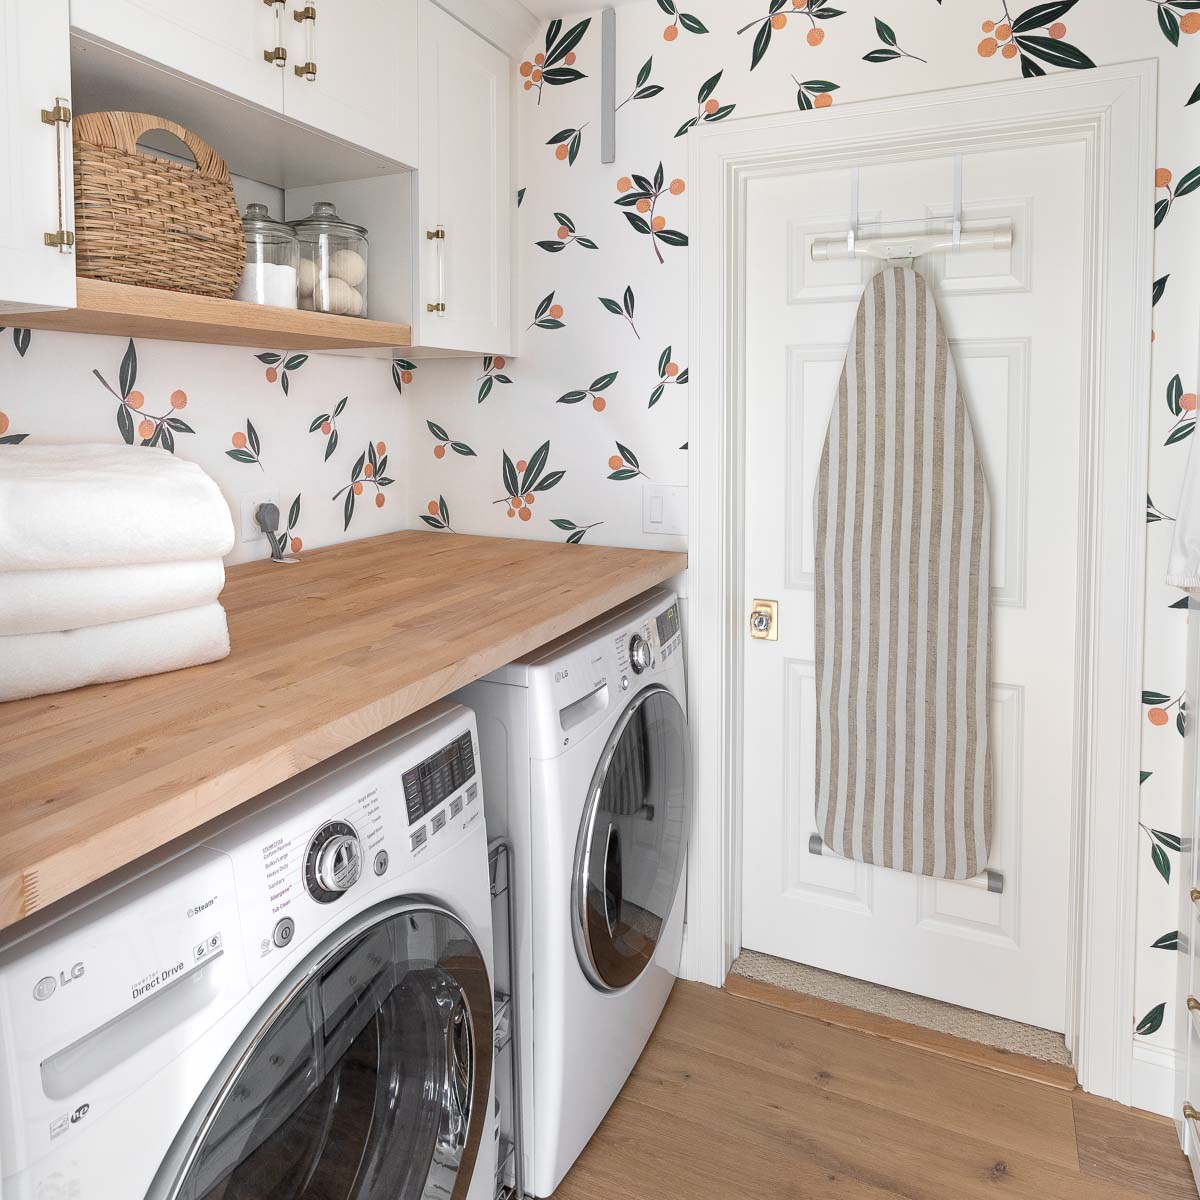 13- The New Must-Haves for Today's Home - The Upstairs Laundry Room